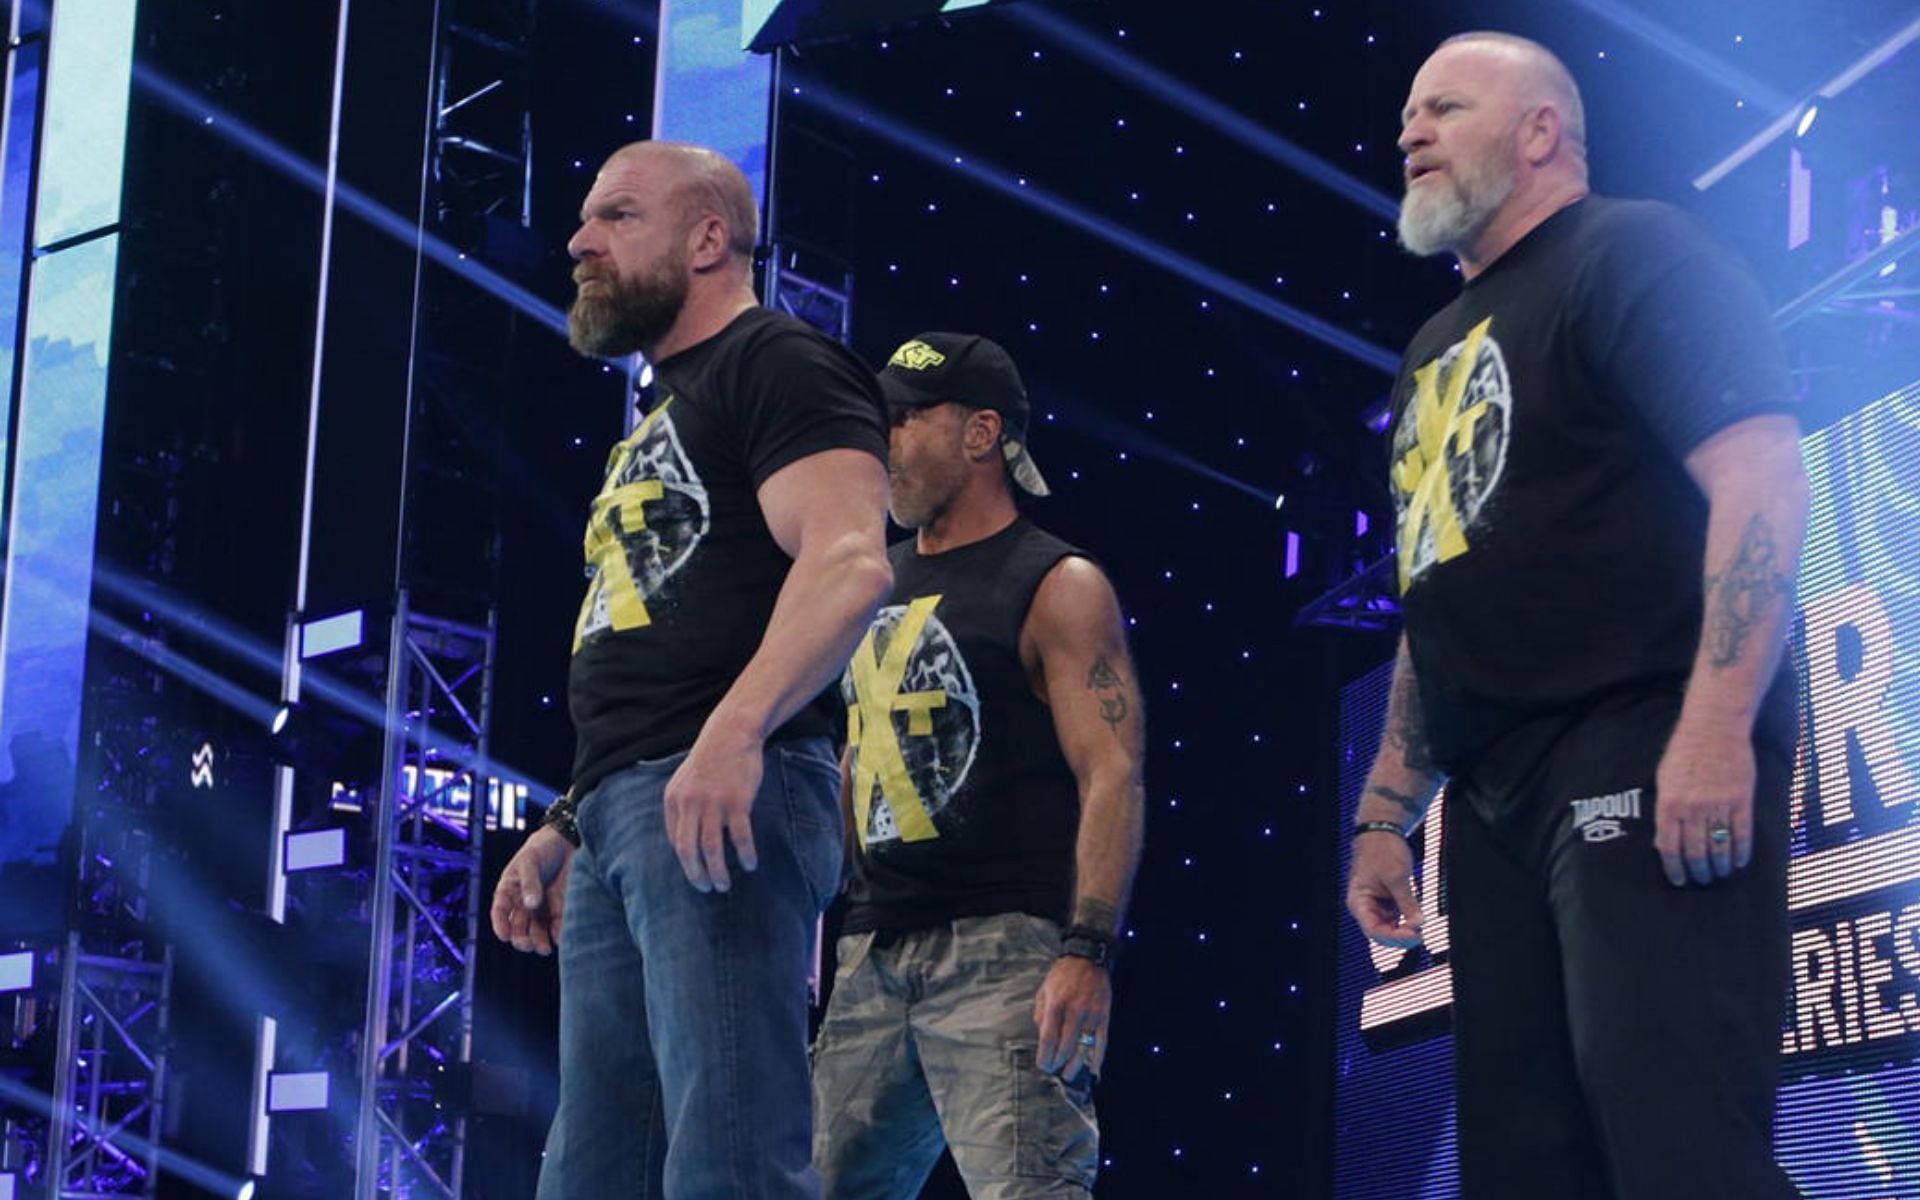 The legendary faction was inducted into the WWE Hall of Fame in 2019